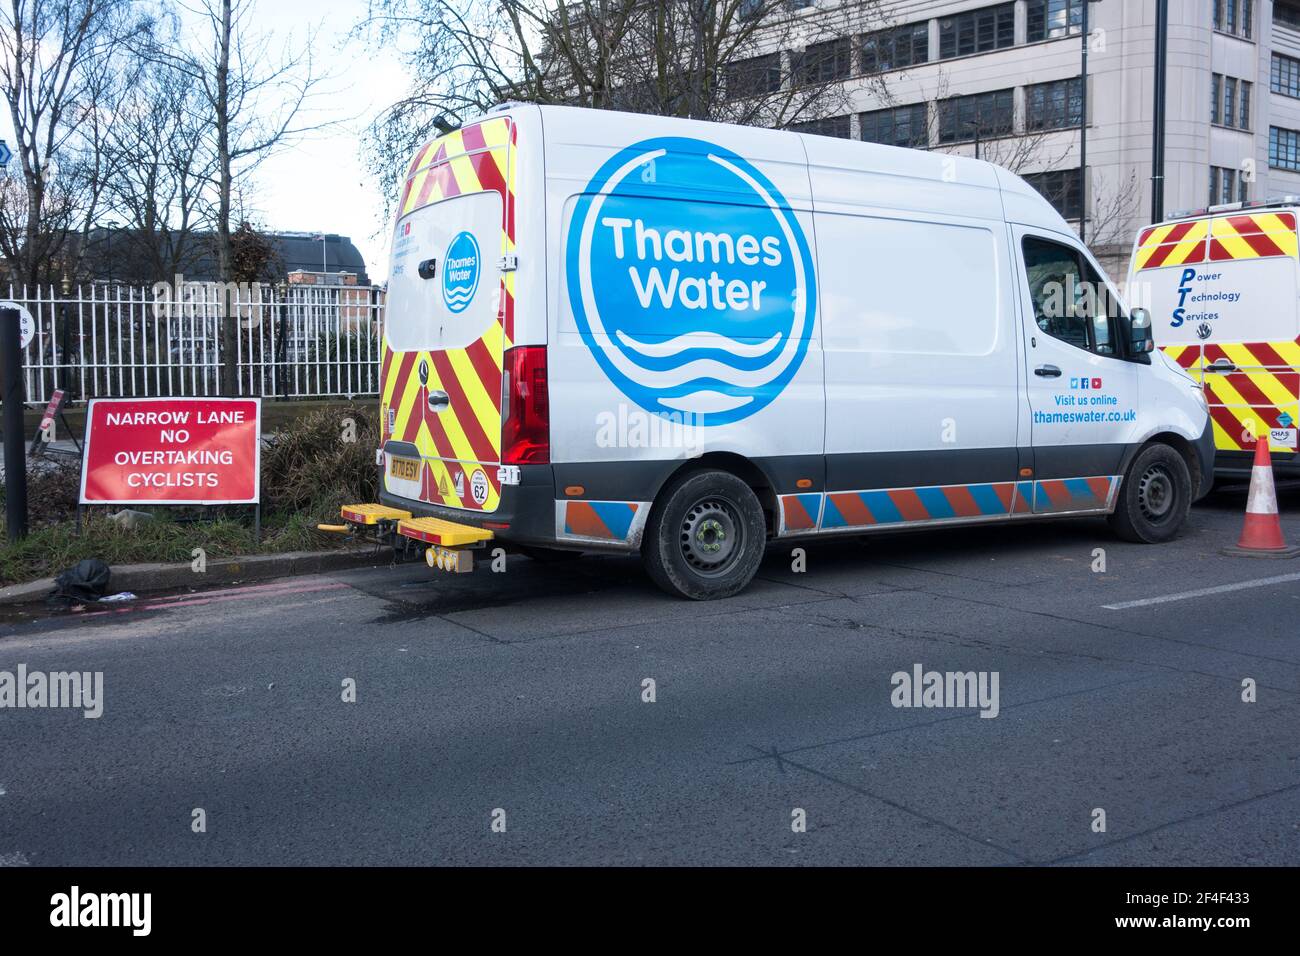 Thames Water van working on the street cutting down one lane on road with warning board not to overtake cyclist Stock Photo